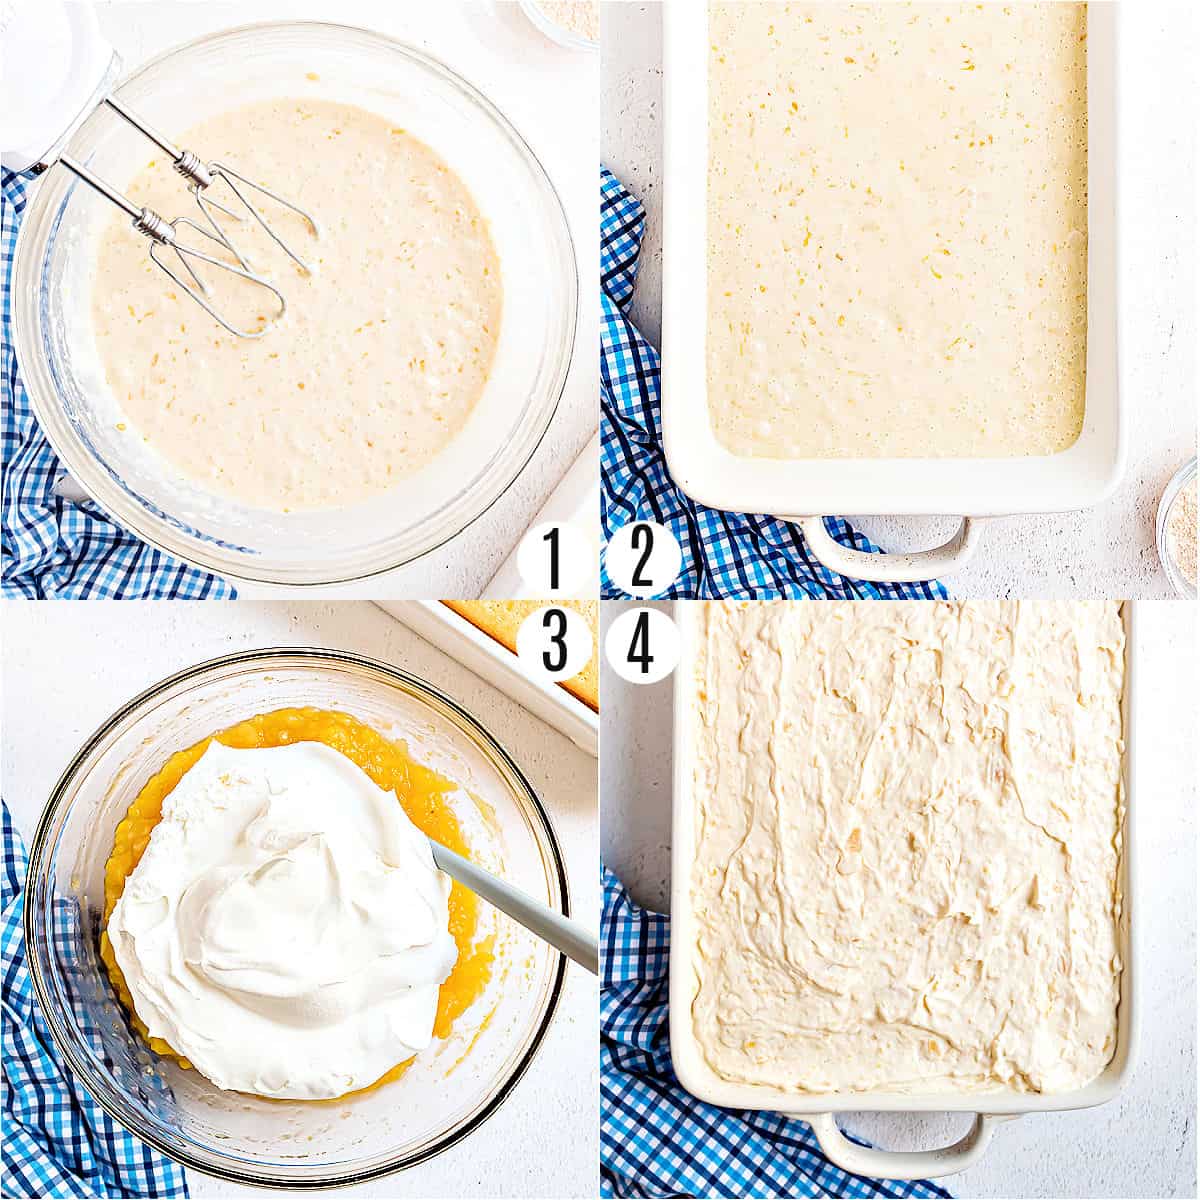 Step by step photos showing how to make pig pickin cake.